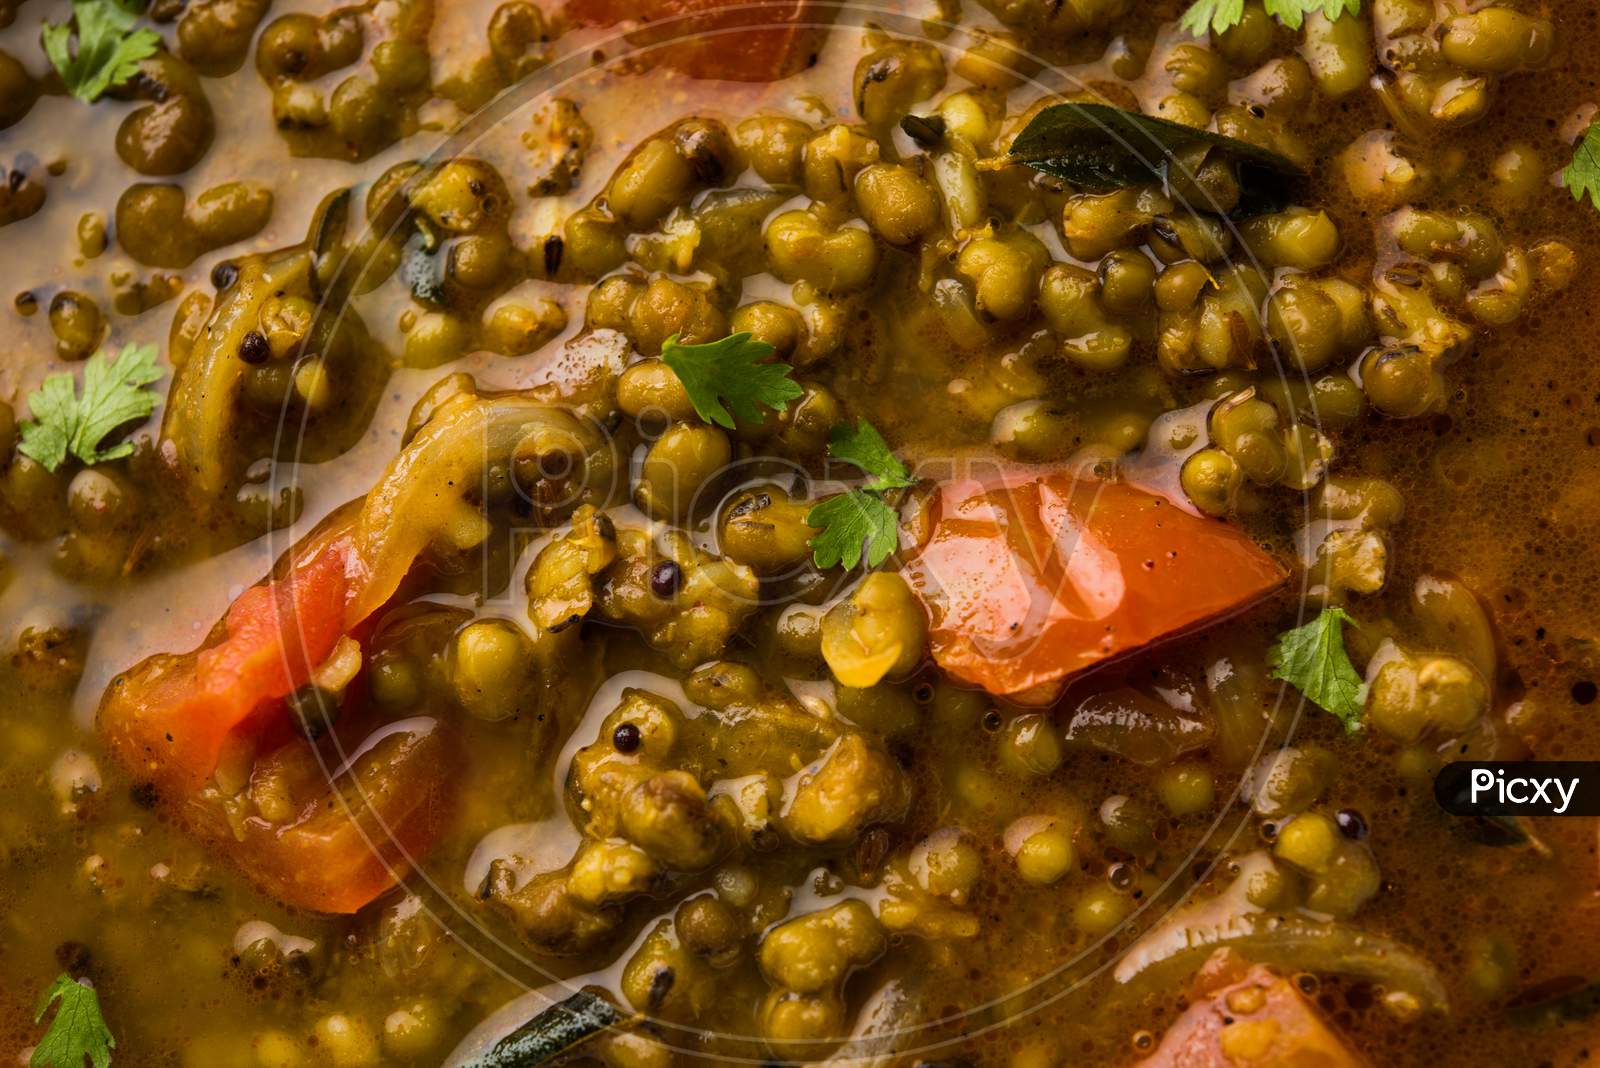 Whole Green Moong Dal fry / Whole Mung bean Tadka served in a bowl. selective focus